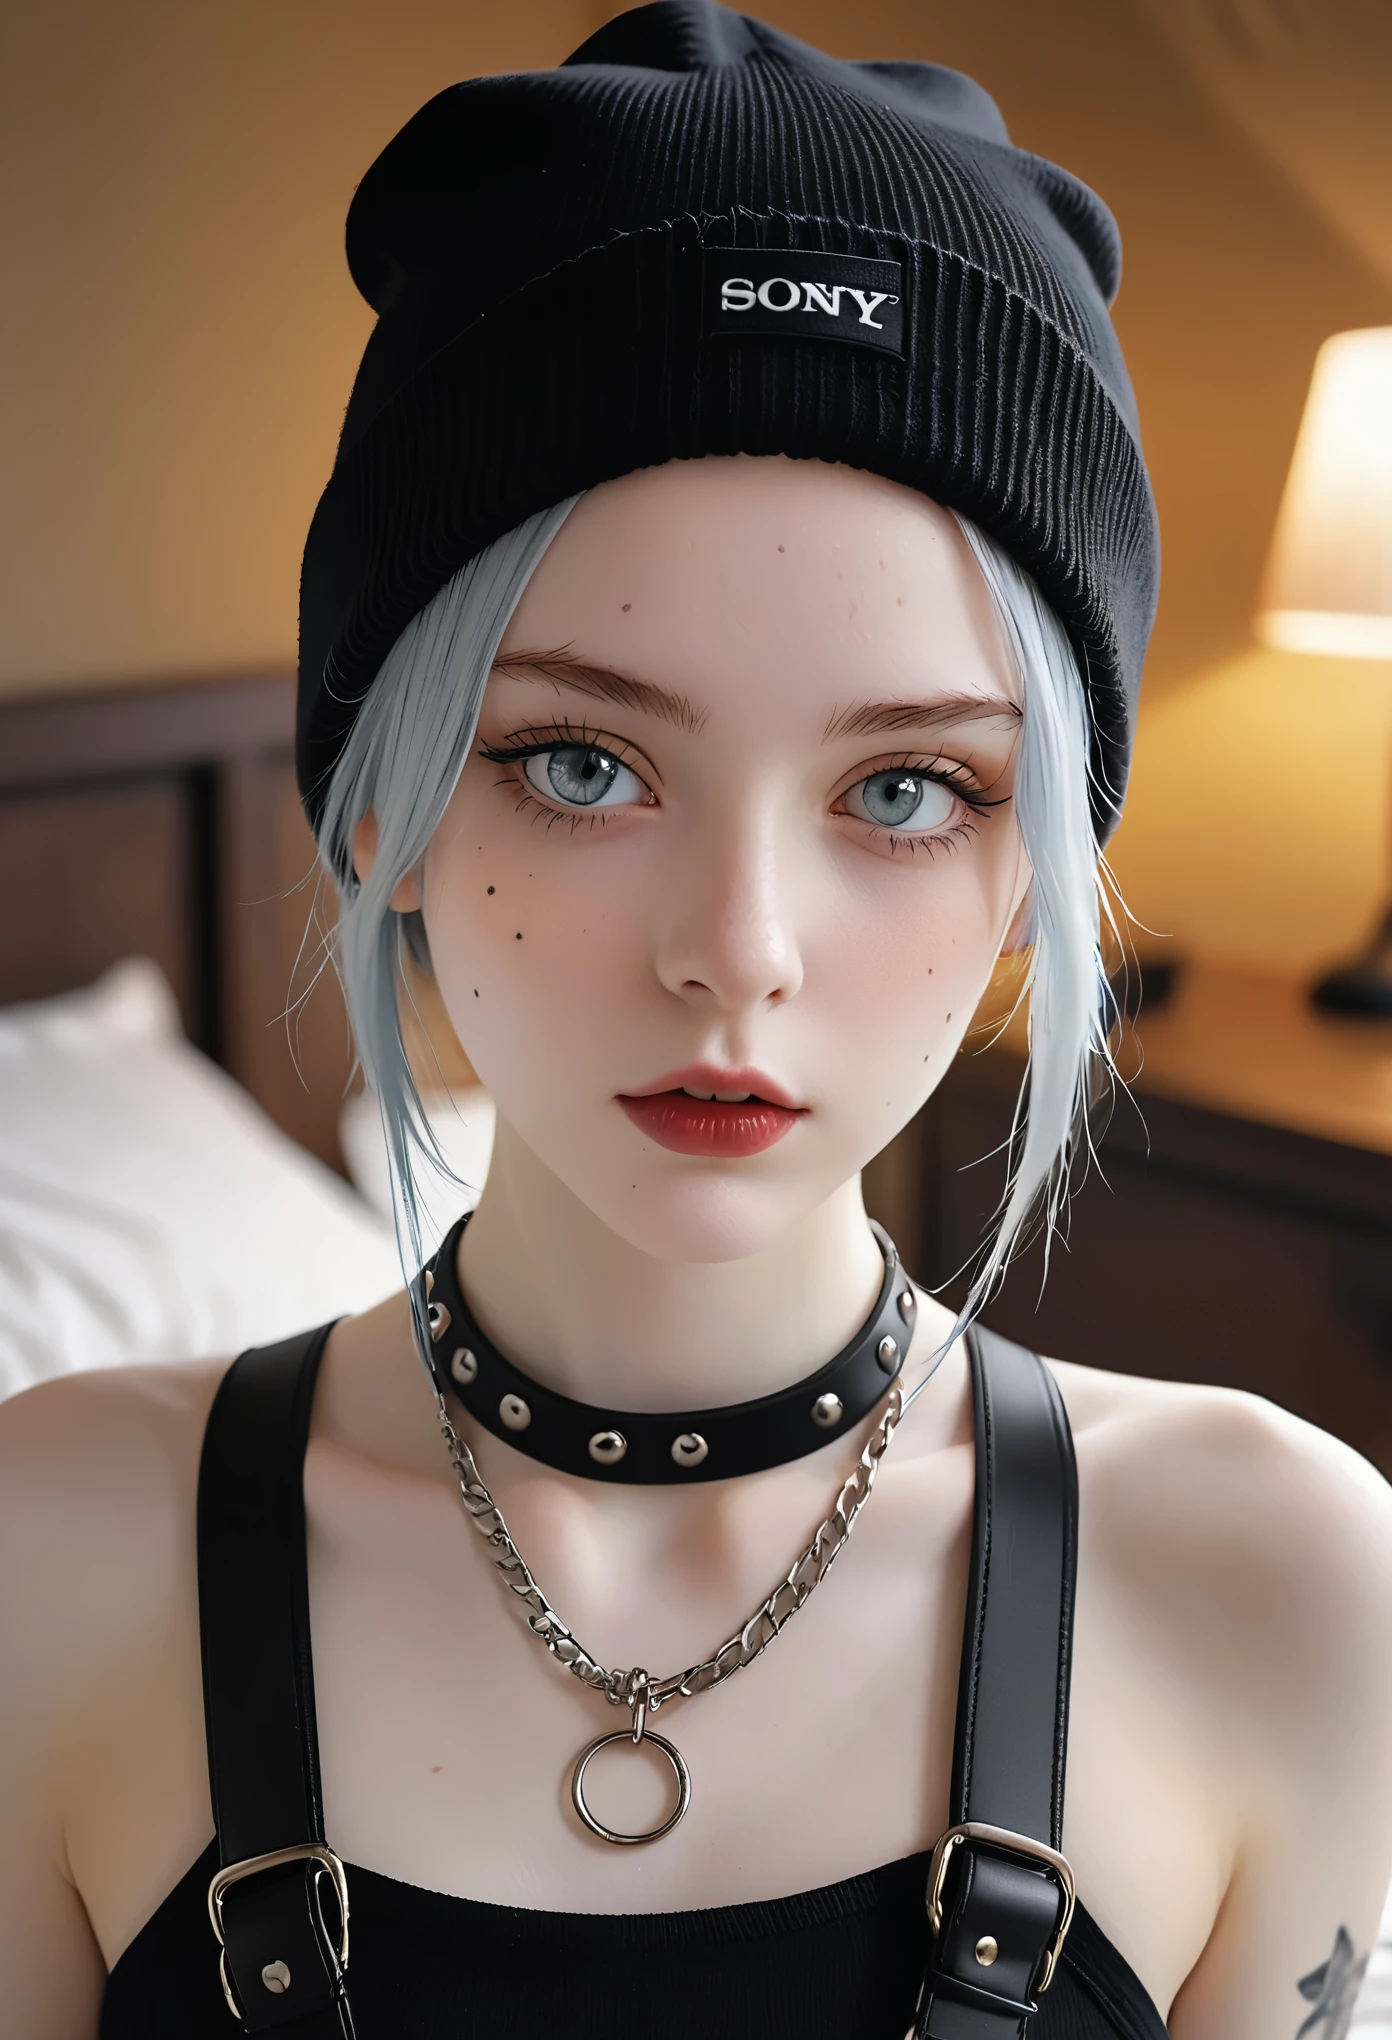 xxmixgirl,Thorough, analog style, eye focus, highest quality, (highly detailed skin), photo of a exquisitely beautiful pale skin punk Dutch girl, 21yo, (wearing harness, and beanie), perfect face, alluring eyes, [seductive makeup], skin pores, (piercing:0.5), indoor, messy bedroom, (bokeh:0.6), sharp focus, dappled lighting, (backlighting:0.7), film grain, photographed on a Sony A7R IV, 18mm F/1.7 cine lens, (highly detailed, intricately detailed), 8k, HDR, seductively posing, front view, (uppper body:0.9)